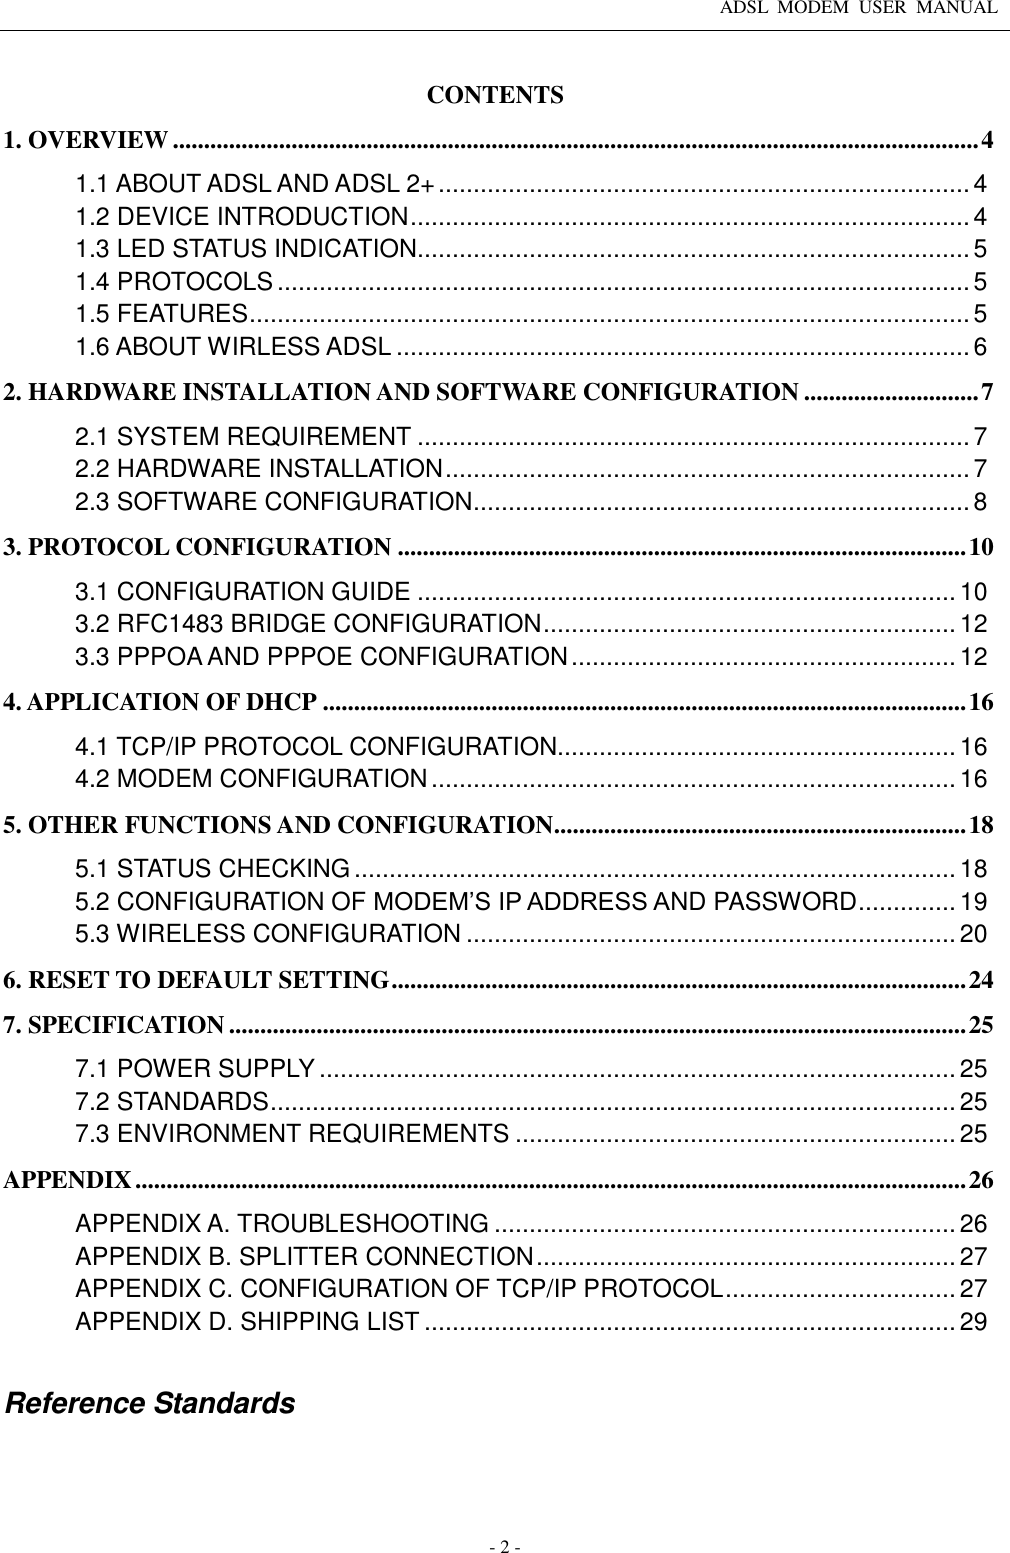 ADSL  MODEM  USER  MANUAL   - 2 - CONTENTS 1. OVERVIEW ................................................................................................................................. 4 1.1 ABOUT ADSL AND ADSL 2+ ............................................................................ 4 1.2 DEVICE INTRODUCTION ................................................................................ 4 1.3 LED STATUS INDICATION ............................................................................... 5 1.4 PROTOCOLS ................................................................................................... 5 1.5 FEATURES ....................................................................................................... 5 1.6 ABOUT WIRLESS ADSL .................................................................................. 6 2. HARDWARE INSTALLATION AND SOFTWARE CONFIGURATION ............................ 7 2.1 SYSTEM REQUIREMENT ............................................................................... 7 2.2 HARDWARE INSTALLATION ........................................................................... 7 2.3 SOFTWARE CONFIGURATION ....................................................................... 8 3. PROTOCOL CONFIGURATION ........................................................................................... 10 3.1 CONFIGURATION GUIDE ............................................................................. 10 3.2 RFC1483 BRIDGE CONFIGURATION ........................................................... 12 3.3 PPPOA AND PPPOE CONFIGURATION ....................................................... 12 4. APPLICATION OF DHCP ....................................................................................................... 16 4.1 TCP/IP PROTOCOL CONFIGURATION......................................................... 16 4.2 MODEM CONFIGURATION ........................................................................... 16 5. OTHER FUNCTIONS AND CONFIGURATION .................................................................. 18 5.1 STATUS CHECKING ...................................................................................... 18 5.2 CONFIGURATION OF MODEM’S IP ADDRESS AND PASSWORD .............. 19 5.3 WIRELESS CONFIGURATION ...................................................................... 20 6. RESET TO DEFAULT SETTING ............................................................................................ 24 7. SPECIFICATION ...................................................................................................................... 25 7.1 POWER SUPPLY ........................................................................................... 25 7.2 STANDARDS .................................................................................................. 25 7.3 ENVIRONMENT REQUIREMENTS ............................................................... 25 APPENDIX ..................................................................................................................................... 26 APPENDIX A. TROUBLESHOOTING .................................................................. 26 APPENDIX B. SPLITTER CONNECTION ............................................................ 27 APPENDIX C. CONFIGURATION OF TCP/IP PROTOCOL ................................. 27 APPENDIX D. SHIPPING LIST ............................................................................ 29  Reference Standards     